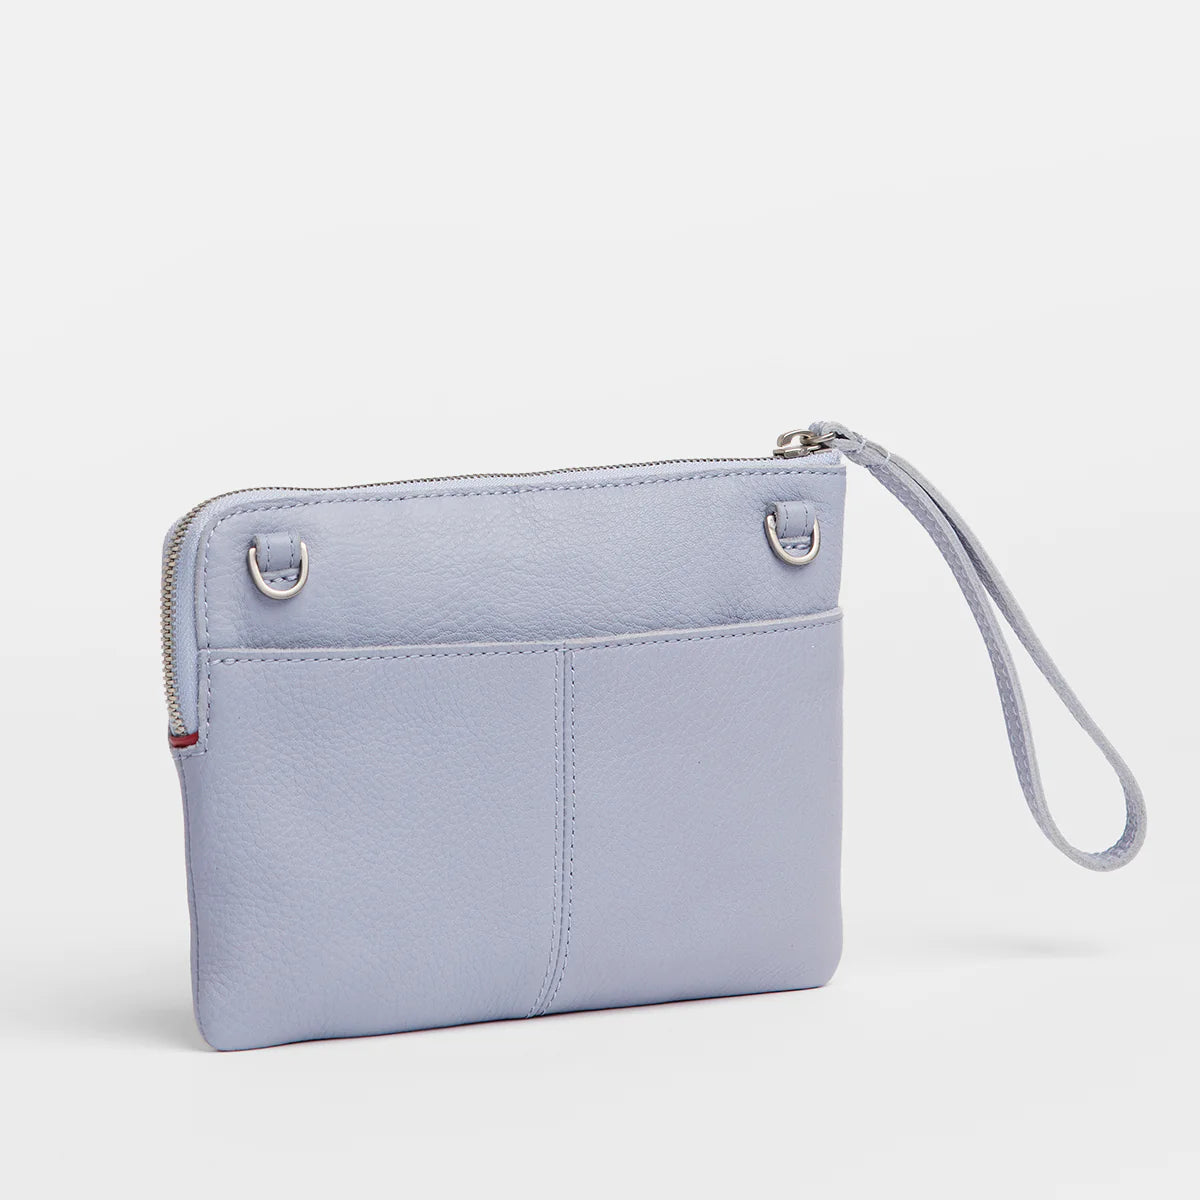 Nash Small in Periwinkle Haze/Brushed Silver